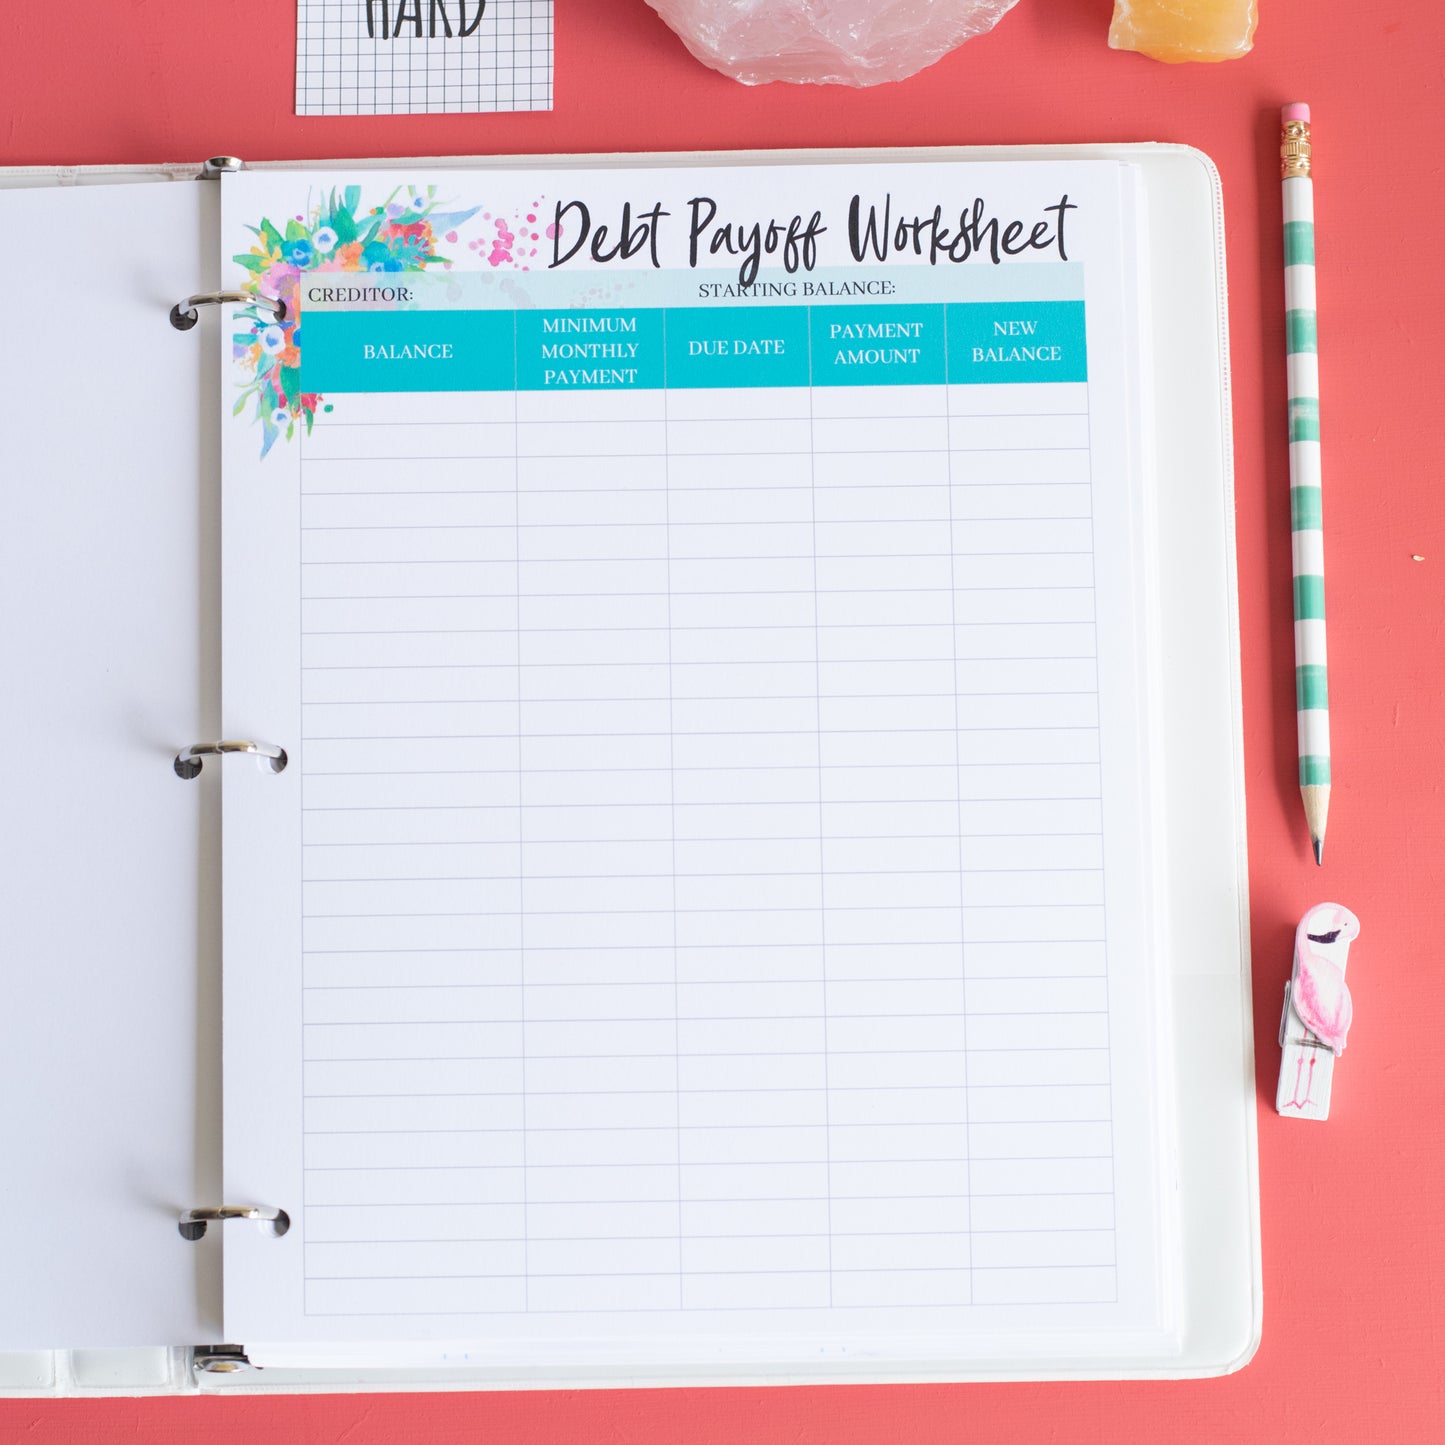 Printable Spend Well Budgeting Planner {Wild Thing}